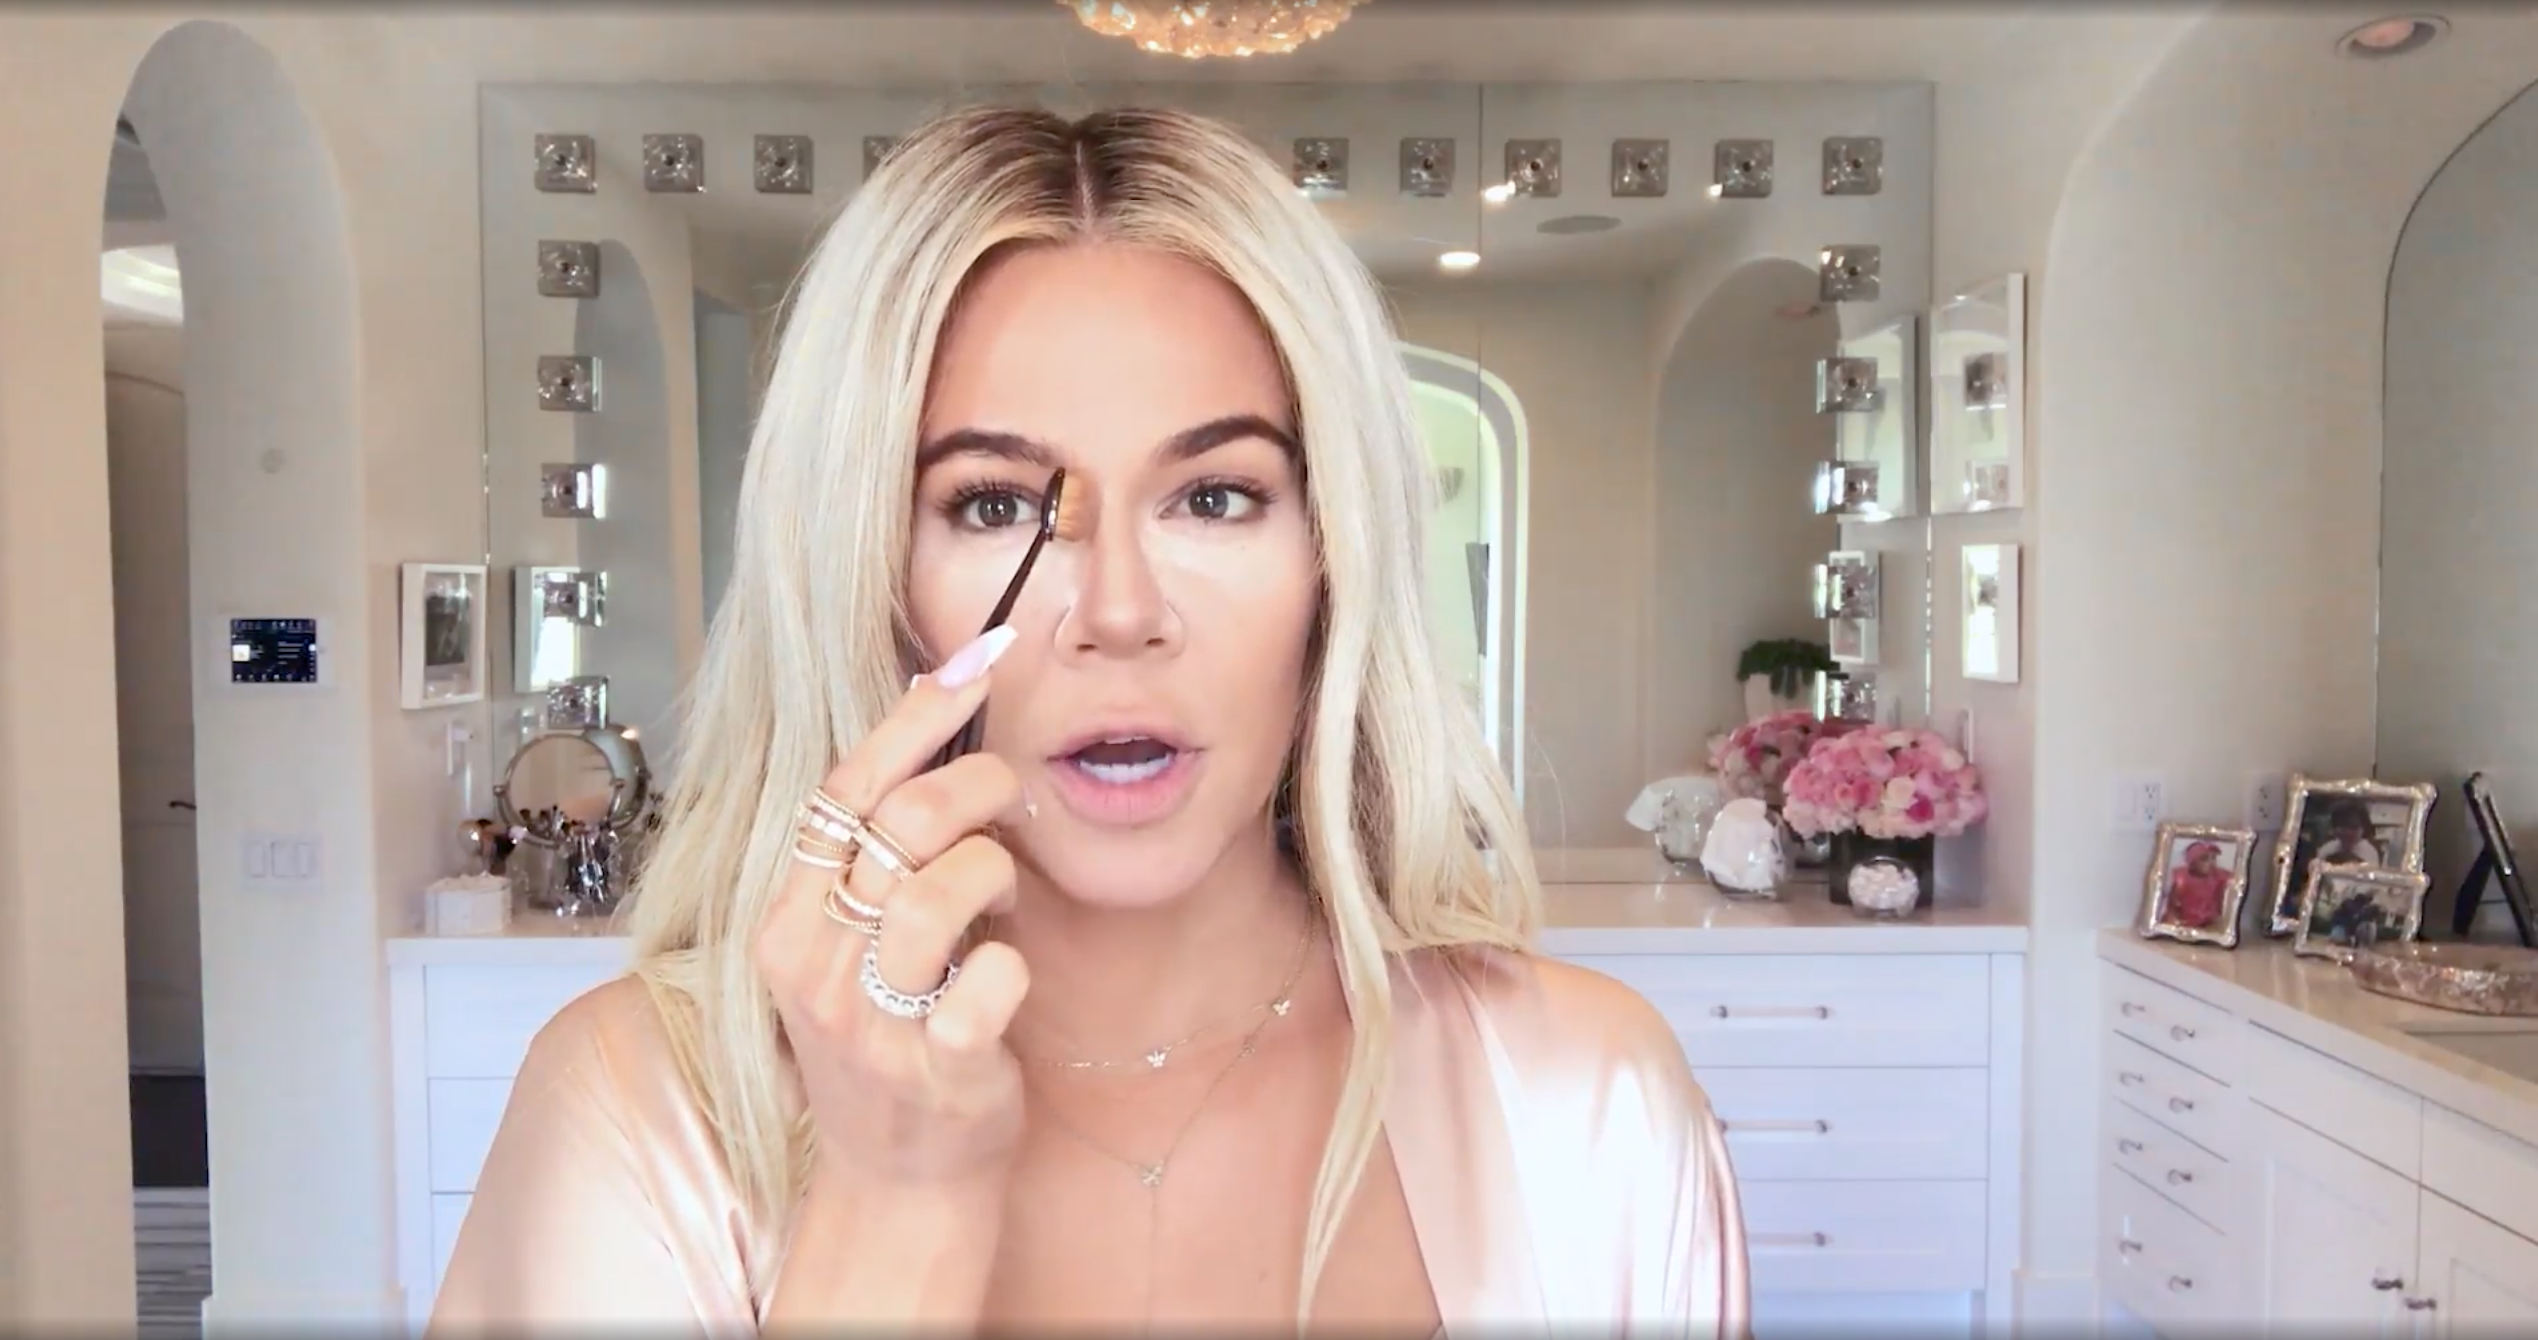 Khloé Kardashian Explained Why Her Nose Contour Sometimes "Looks Crazy" in Photos